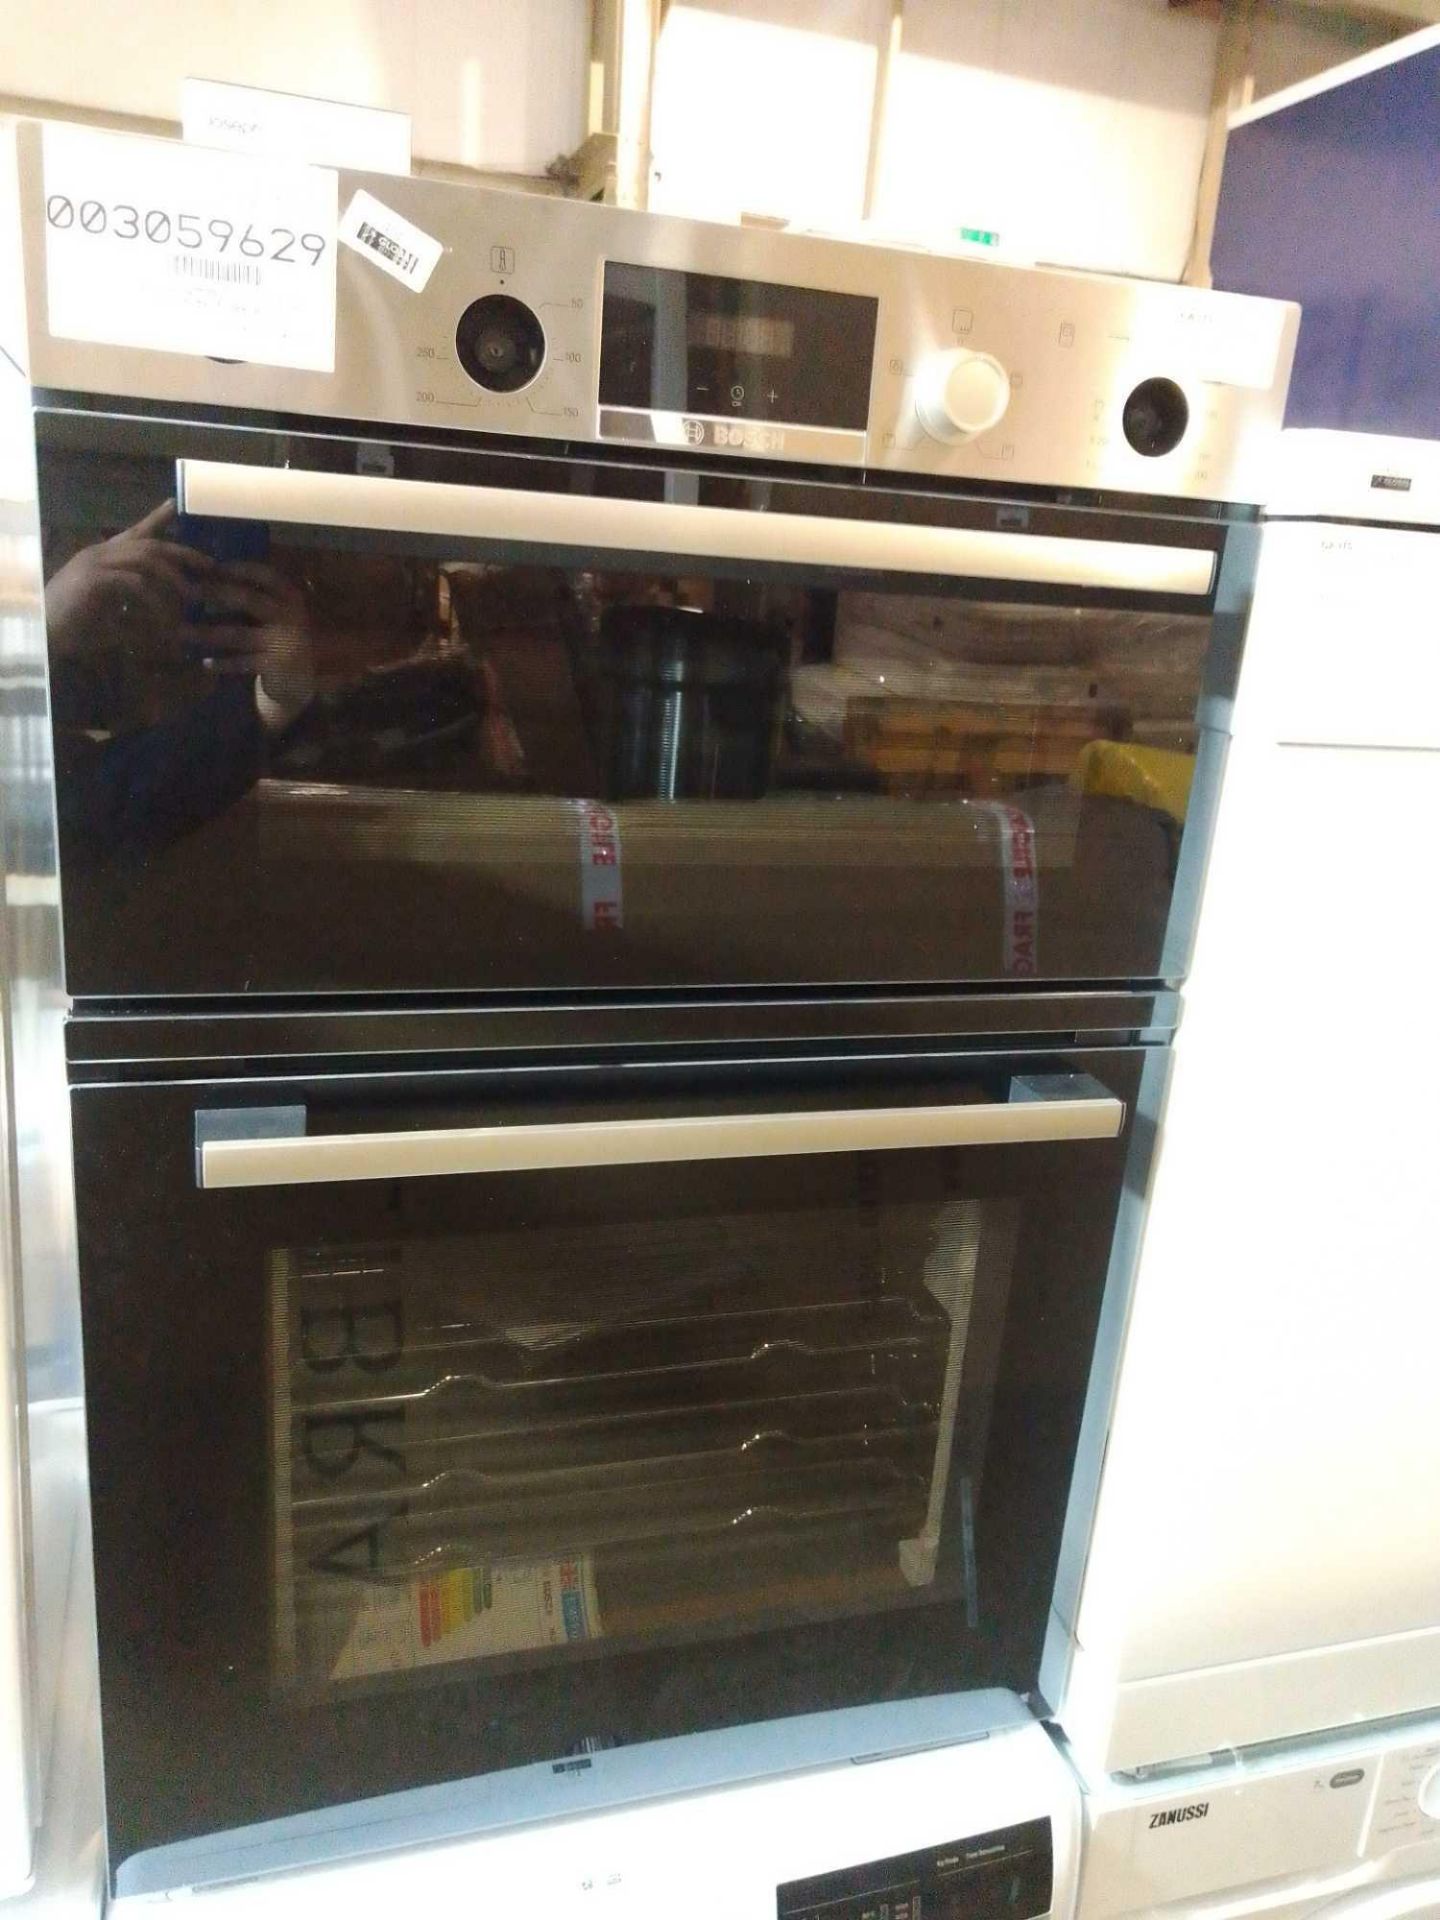 RRP £590 Bosch Integrated Electric Double Oven 003059629 (Appraisals Available On Request) (Pictures